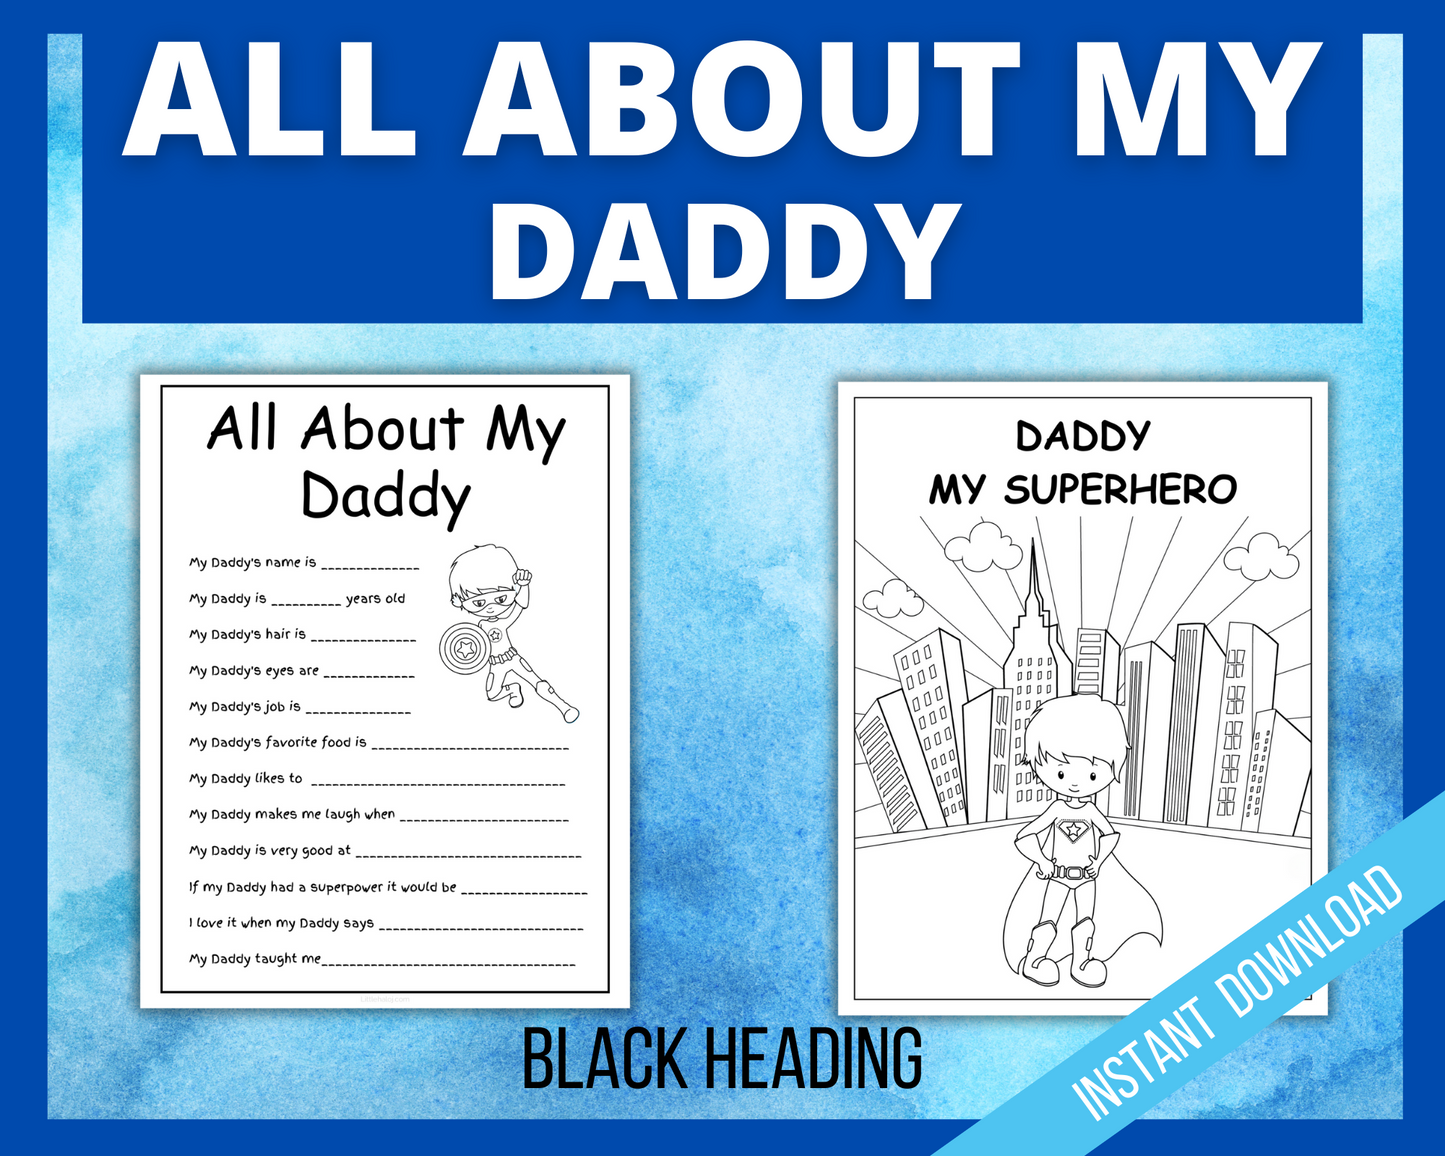 All about my daddy pages and coloring pages